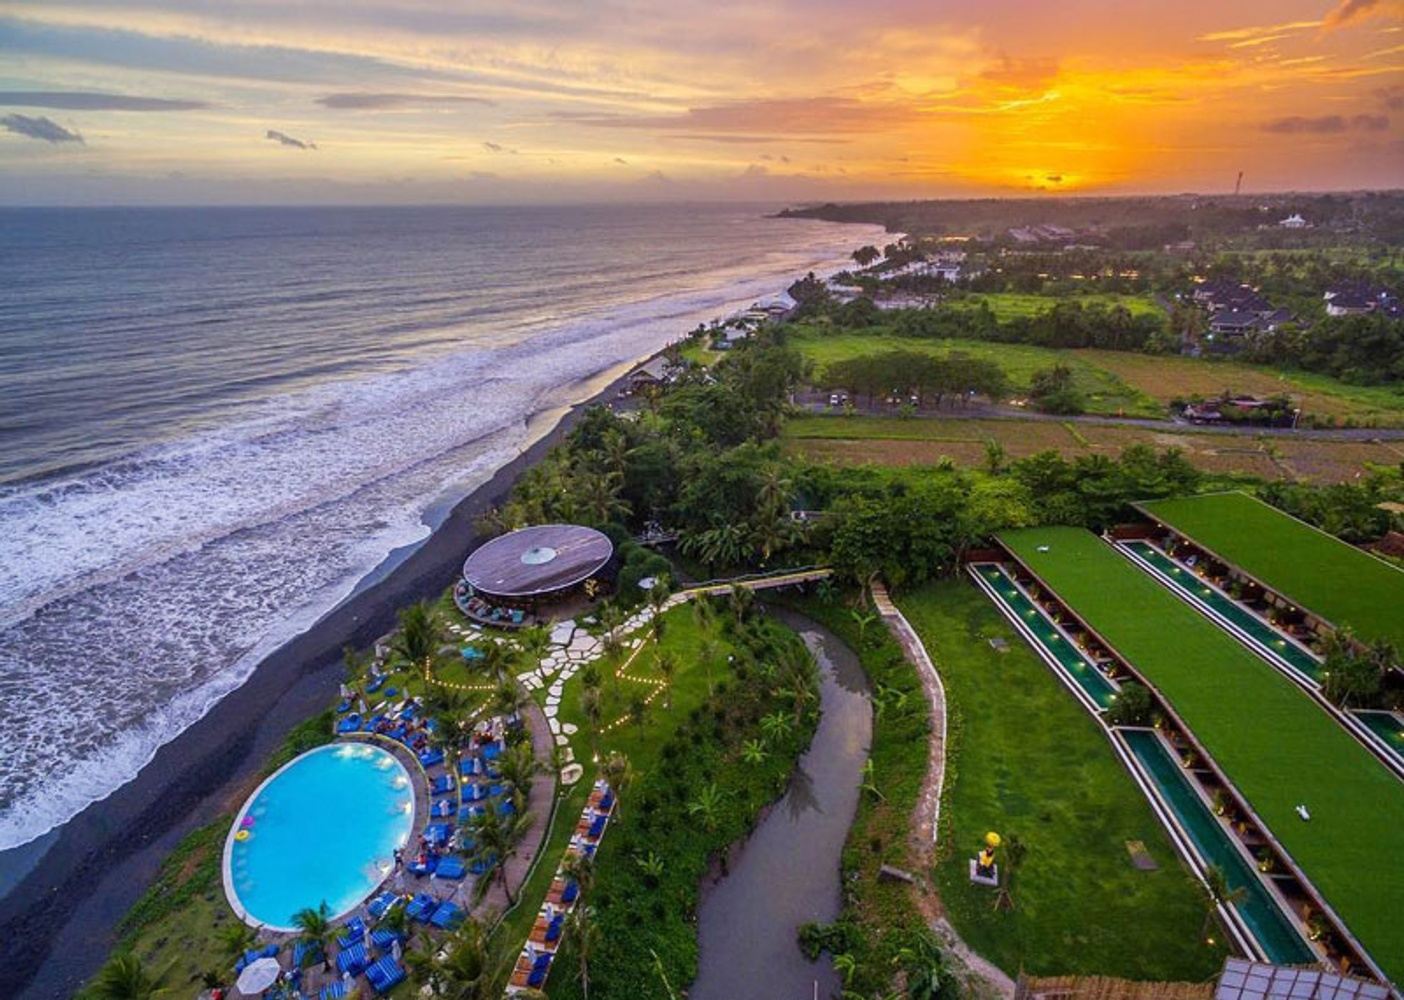 SoulTribe Adventures - 8 Days in Bali on a black sand beach!